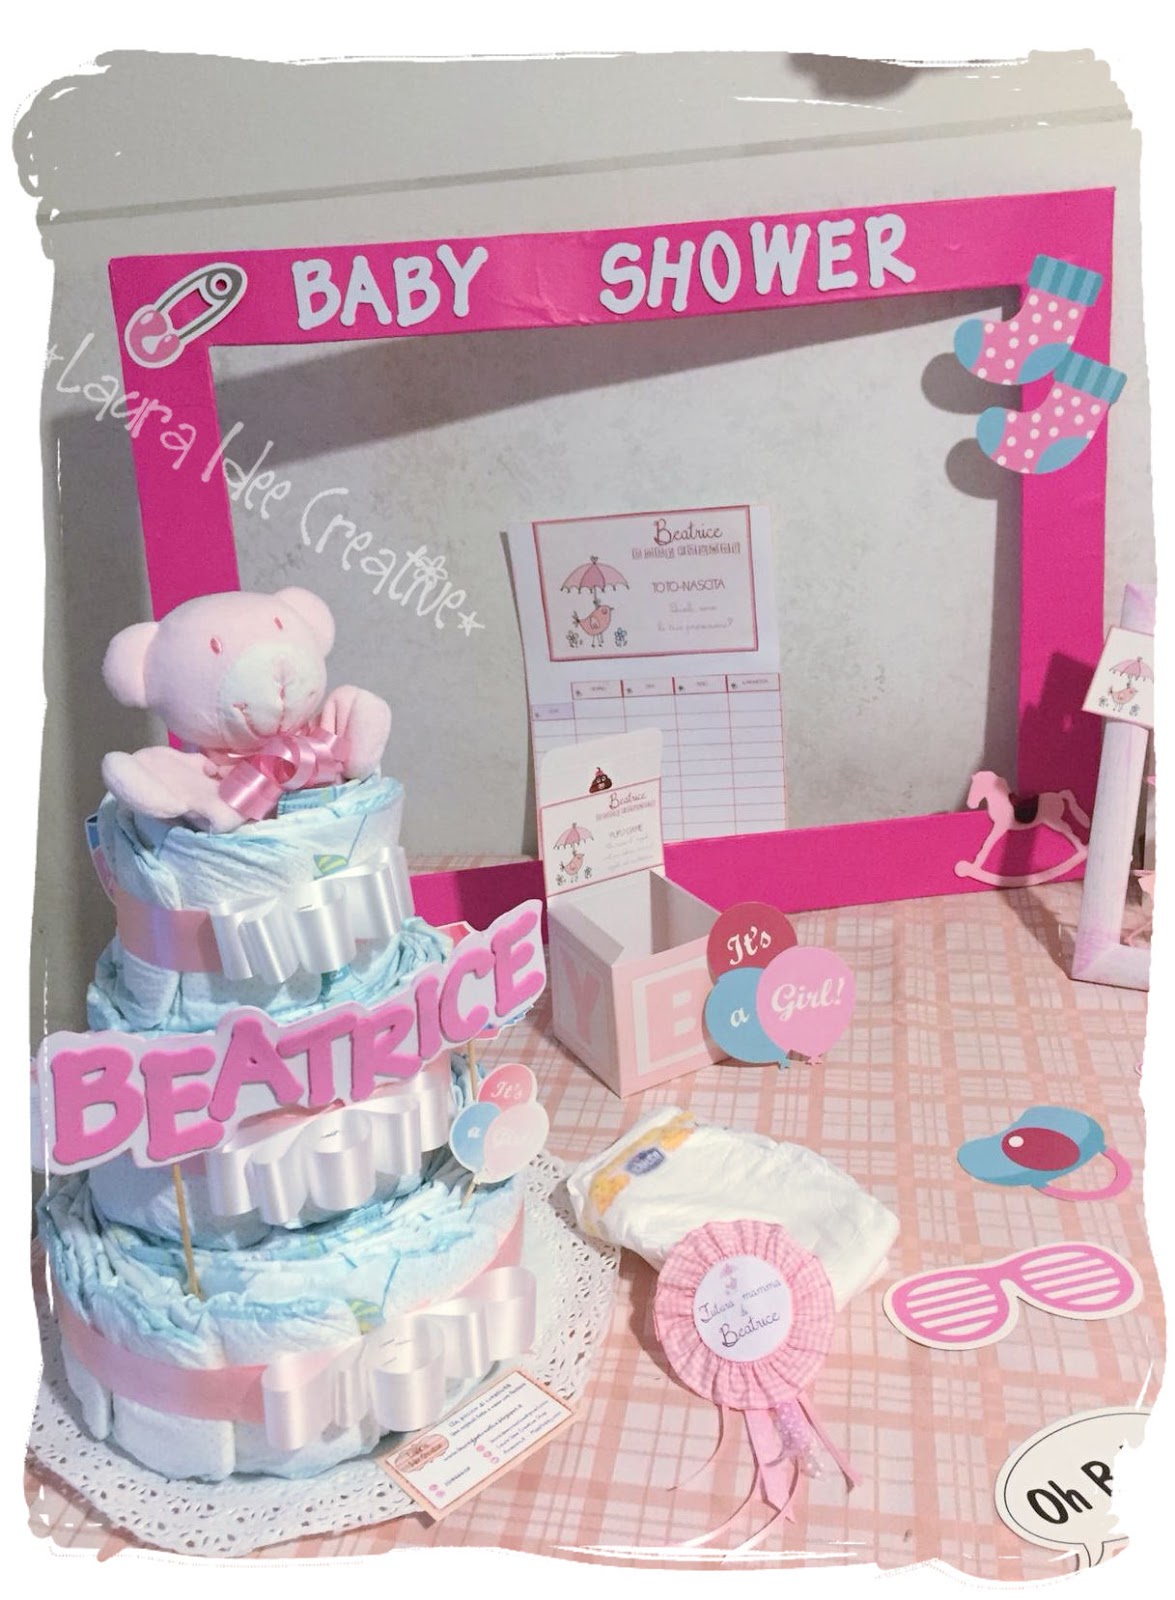 Laura Idee Creative: Allestimento per BABY SHOWER : It's a girl